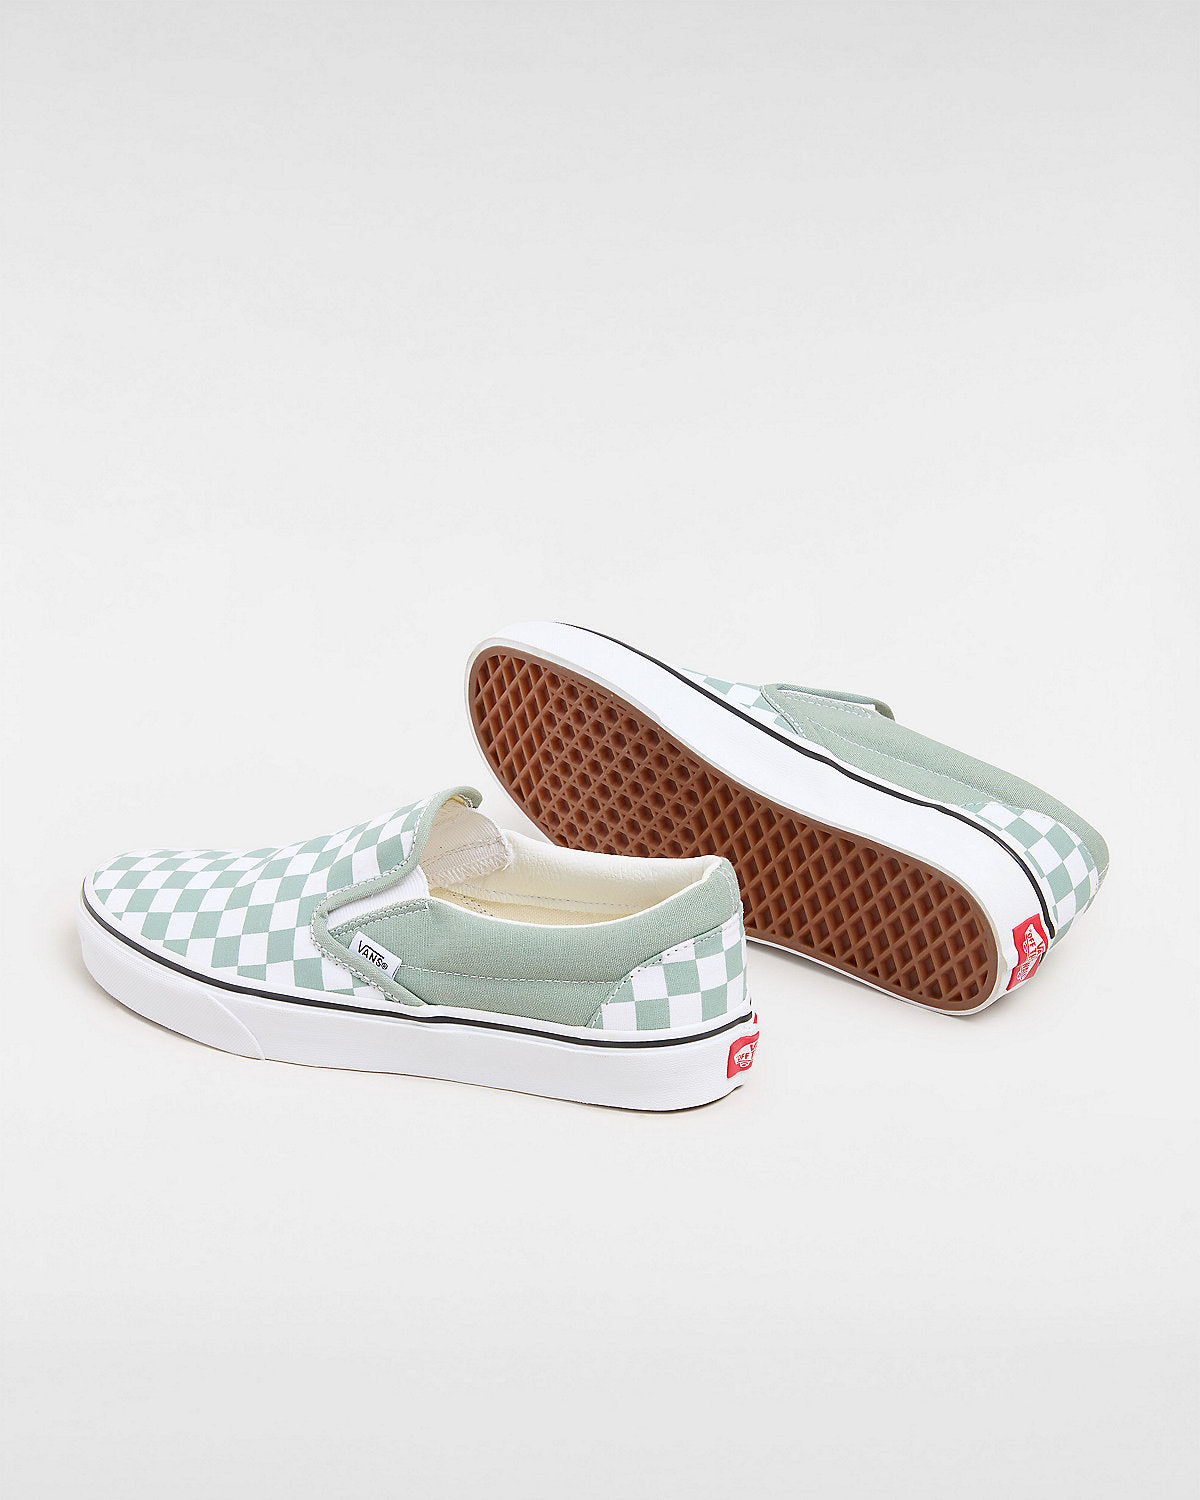 VANS Unisex Classic Slip-On Color Theory Checkerboard Trainers - Iceberg Green